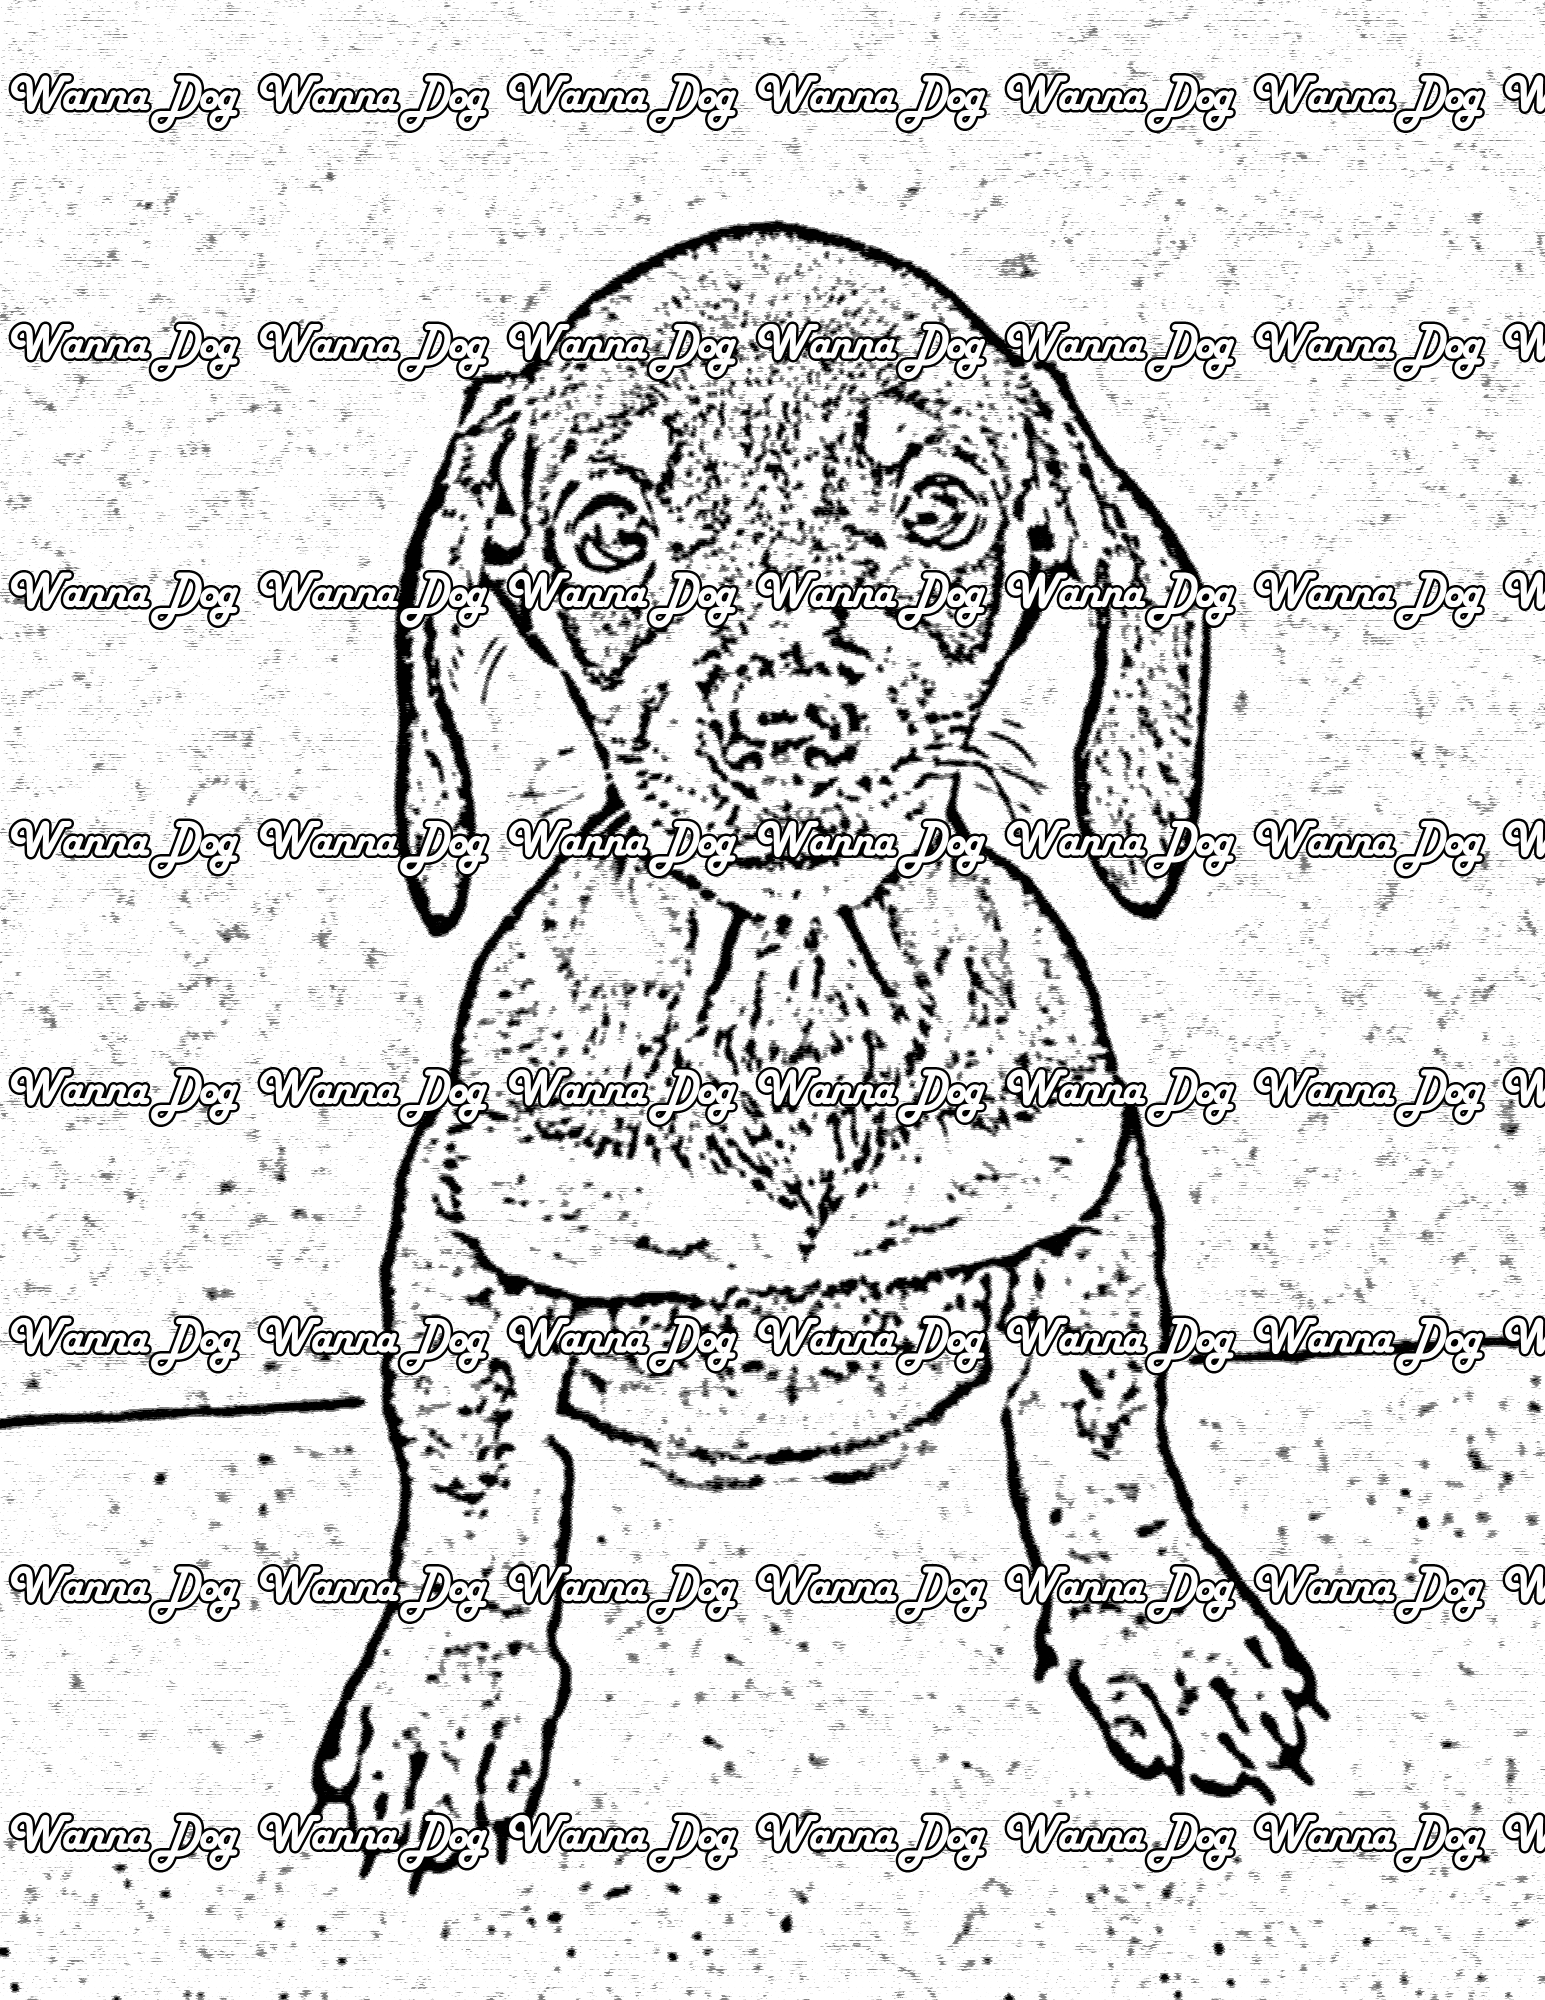 Dachshund Coloring Page of a Dachshund posing